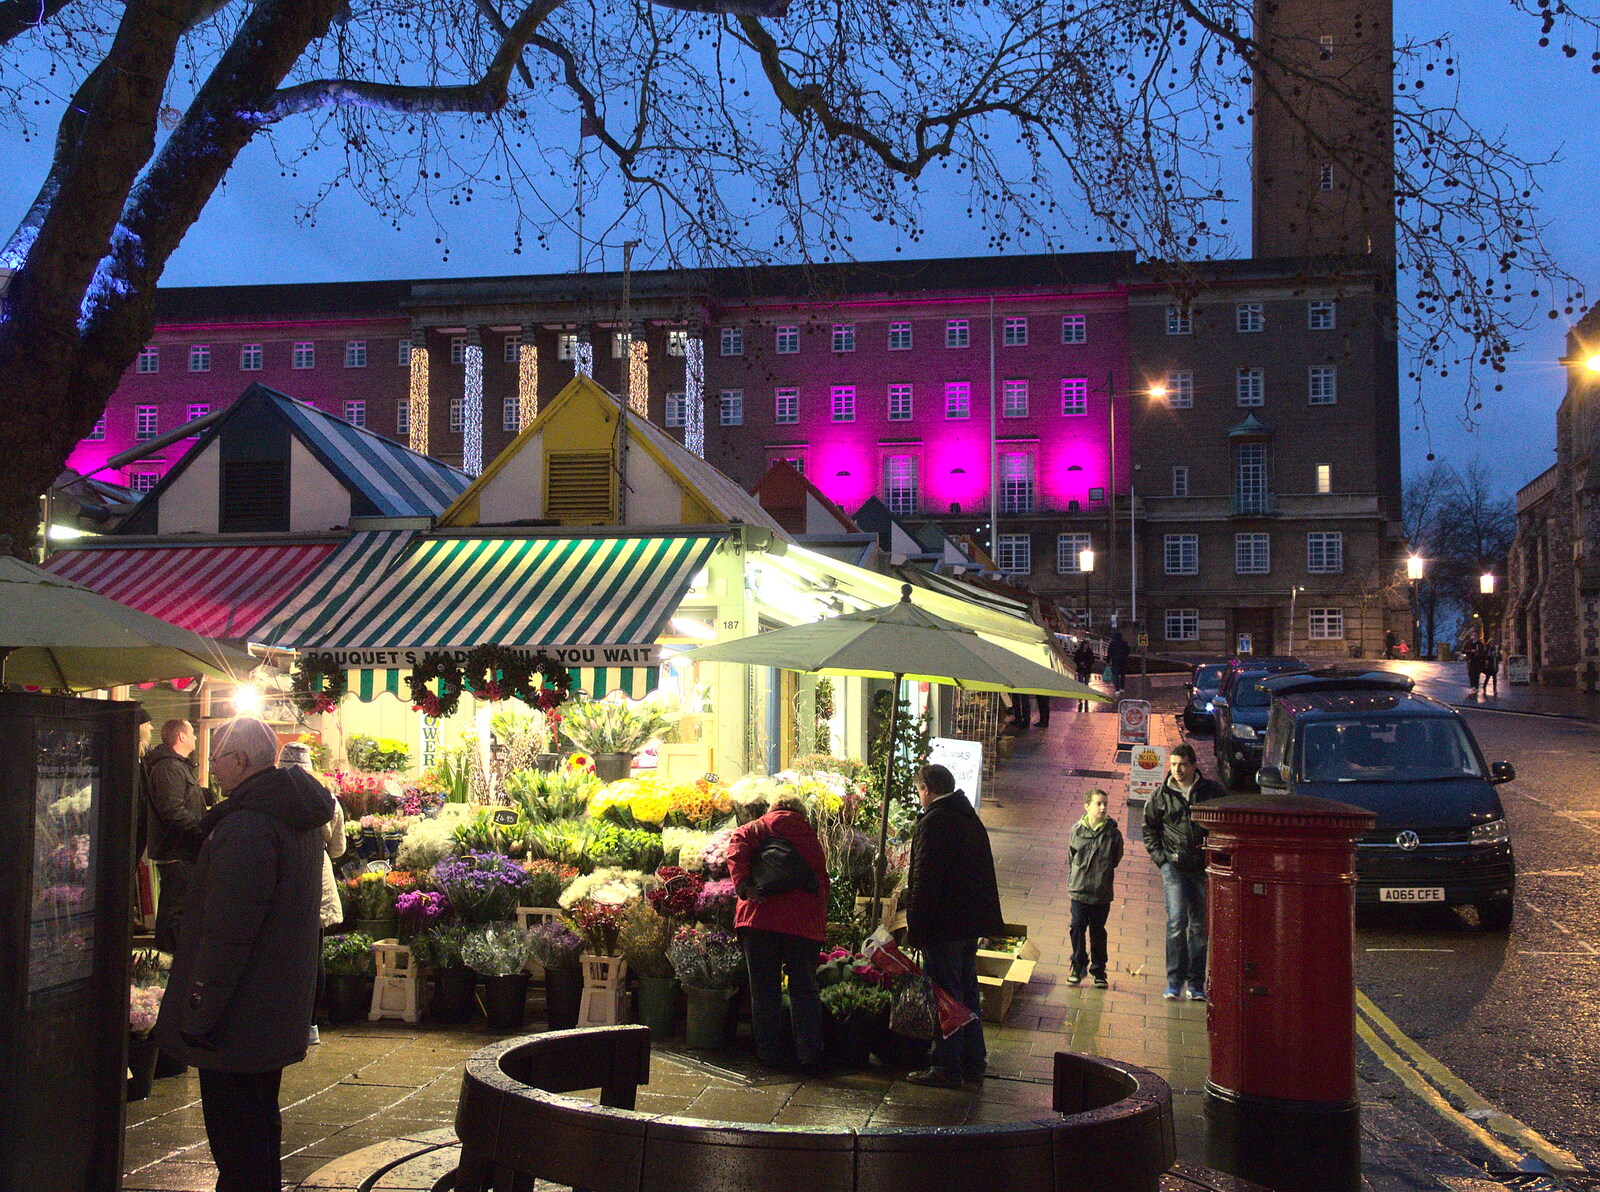 The long-resident flower stall on the market from Southwark, Norwich, and a Power Cut, London, Norfolk and Suffolk - 12th December 2015